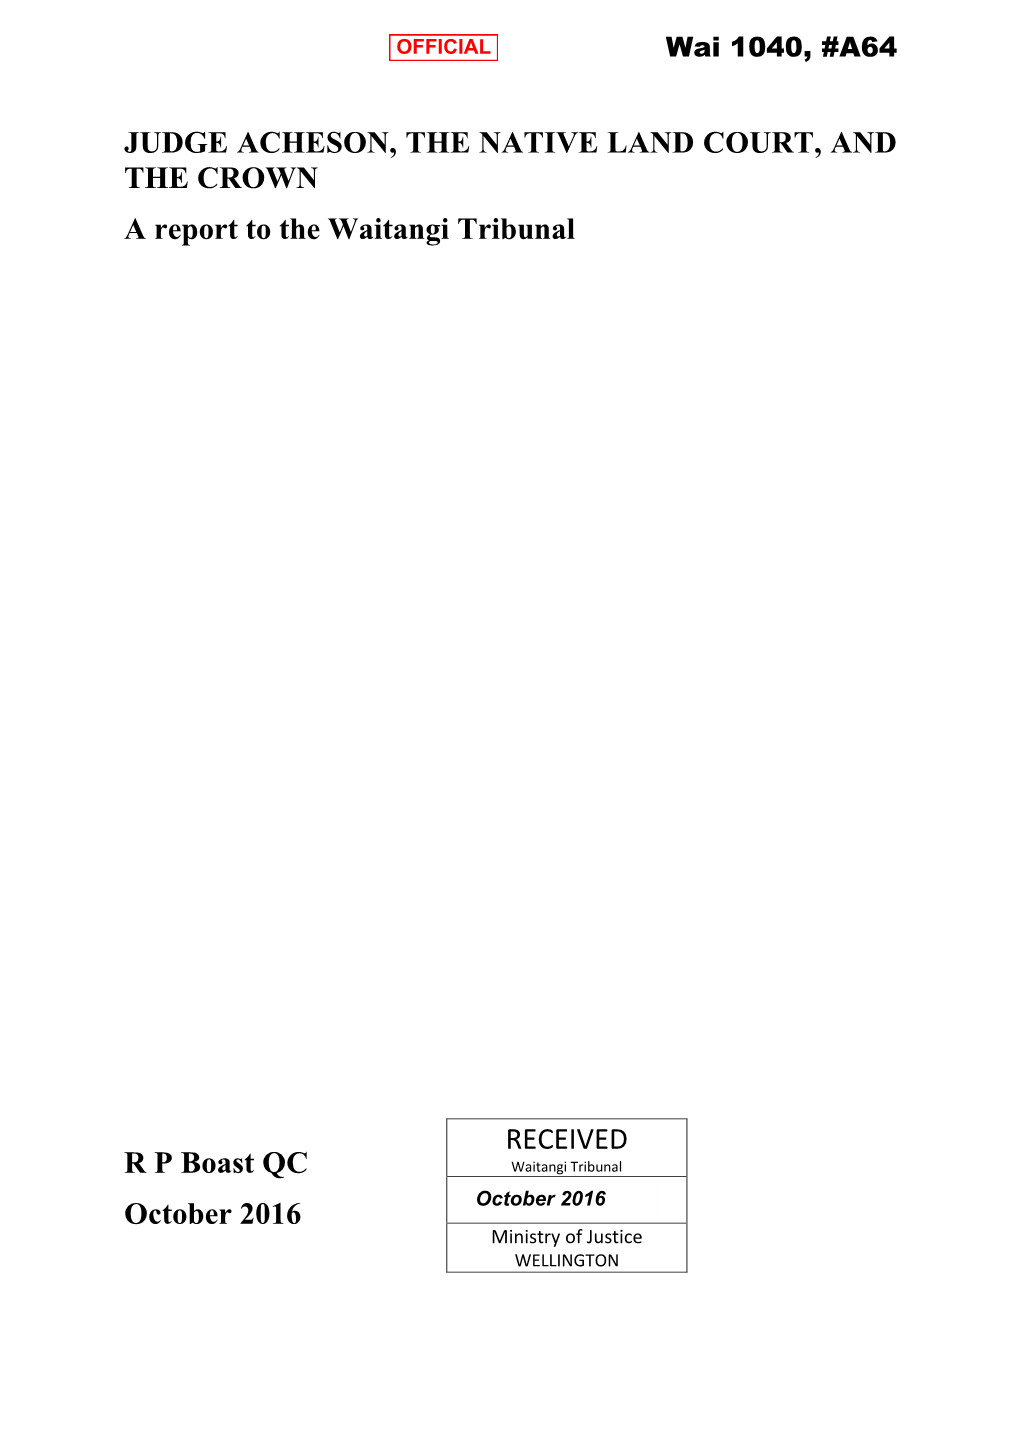 JUDGE ACHESON, the NATIVE LAND COURT, and the CROWN a Report to the Waitangi Tribunal R P Boast QC October 2016 RECEIVED